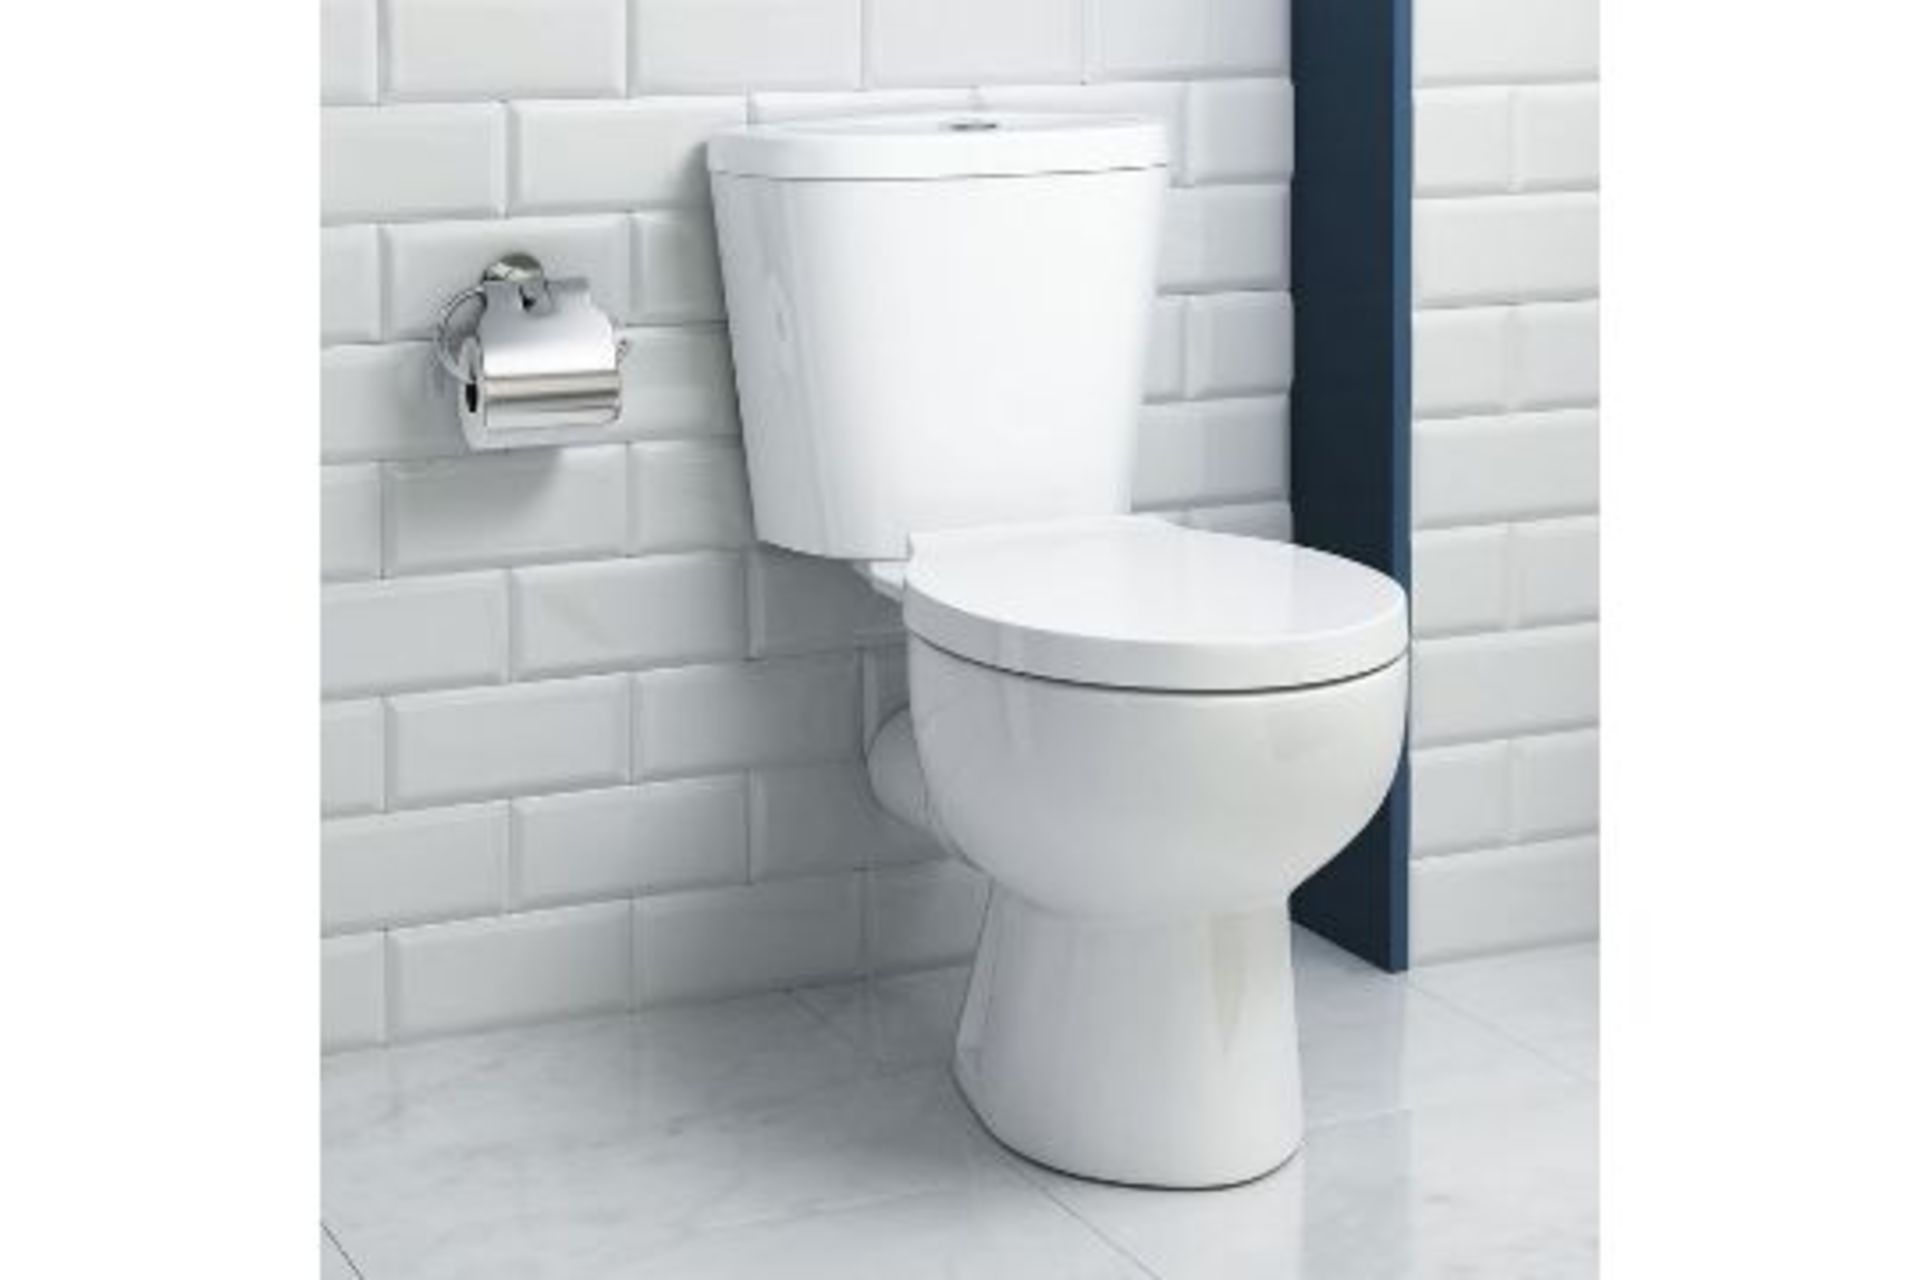 New Quartz Close Coupled Toilet.. We Love This Because It Is Simply Great Value! Made From Wh...